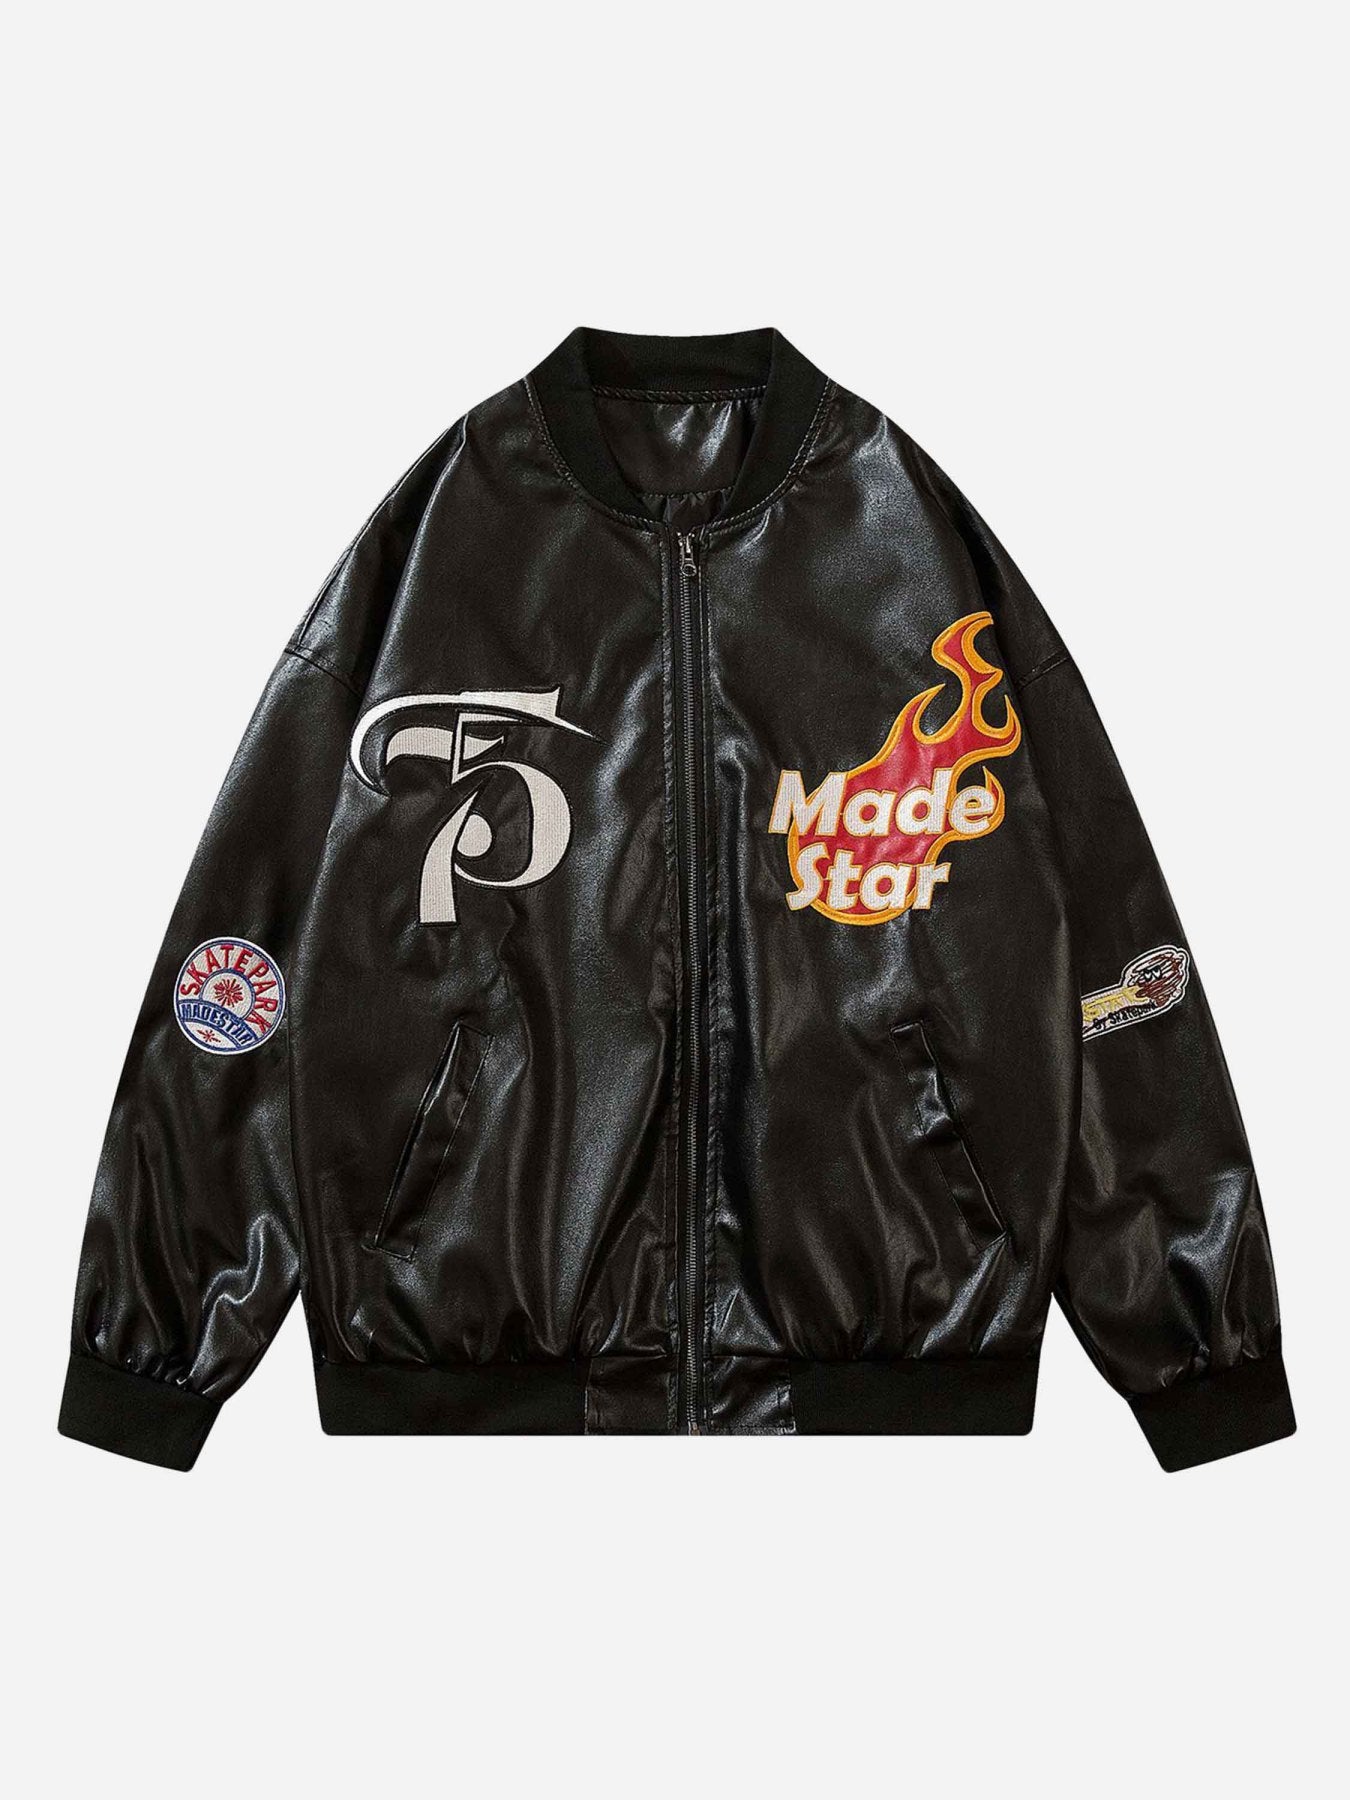 Thesupermade Flame Design Loose Leather Jacket